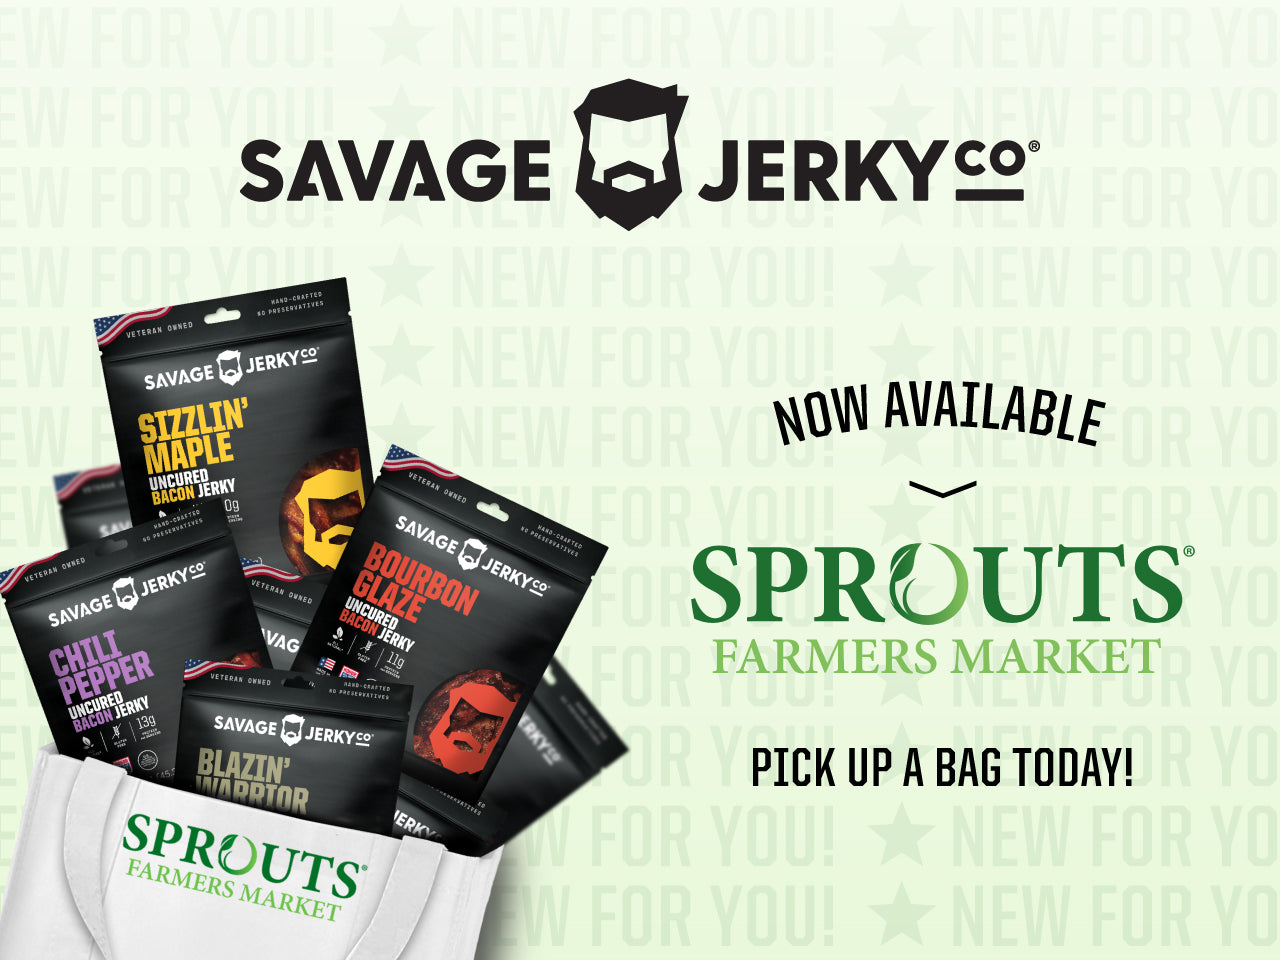 Savage Jerky Now at Sprouts Farmers Market